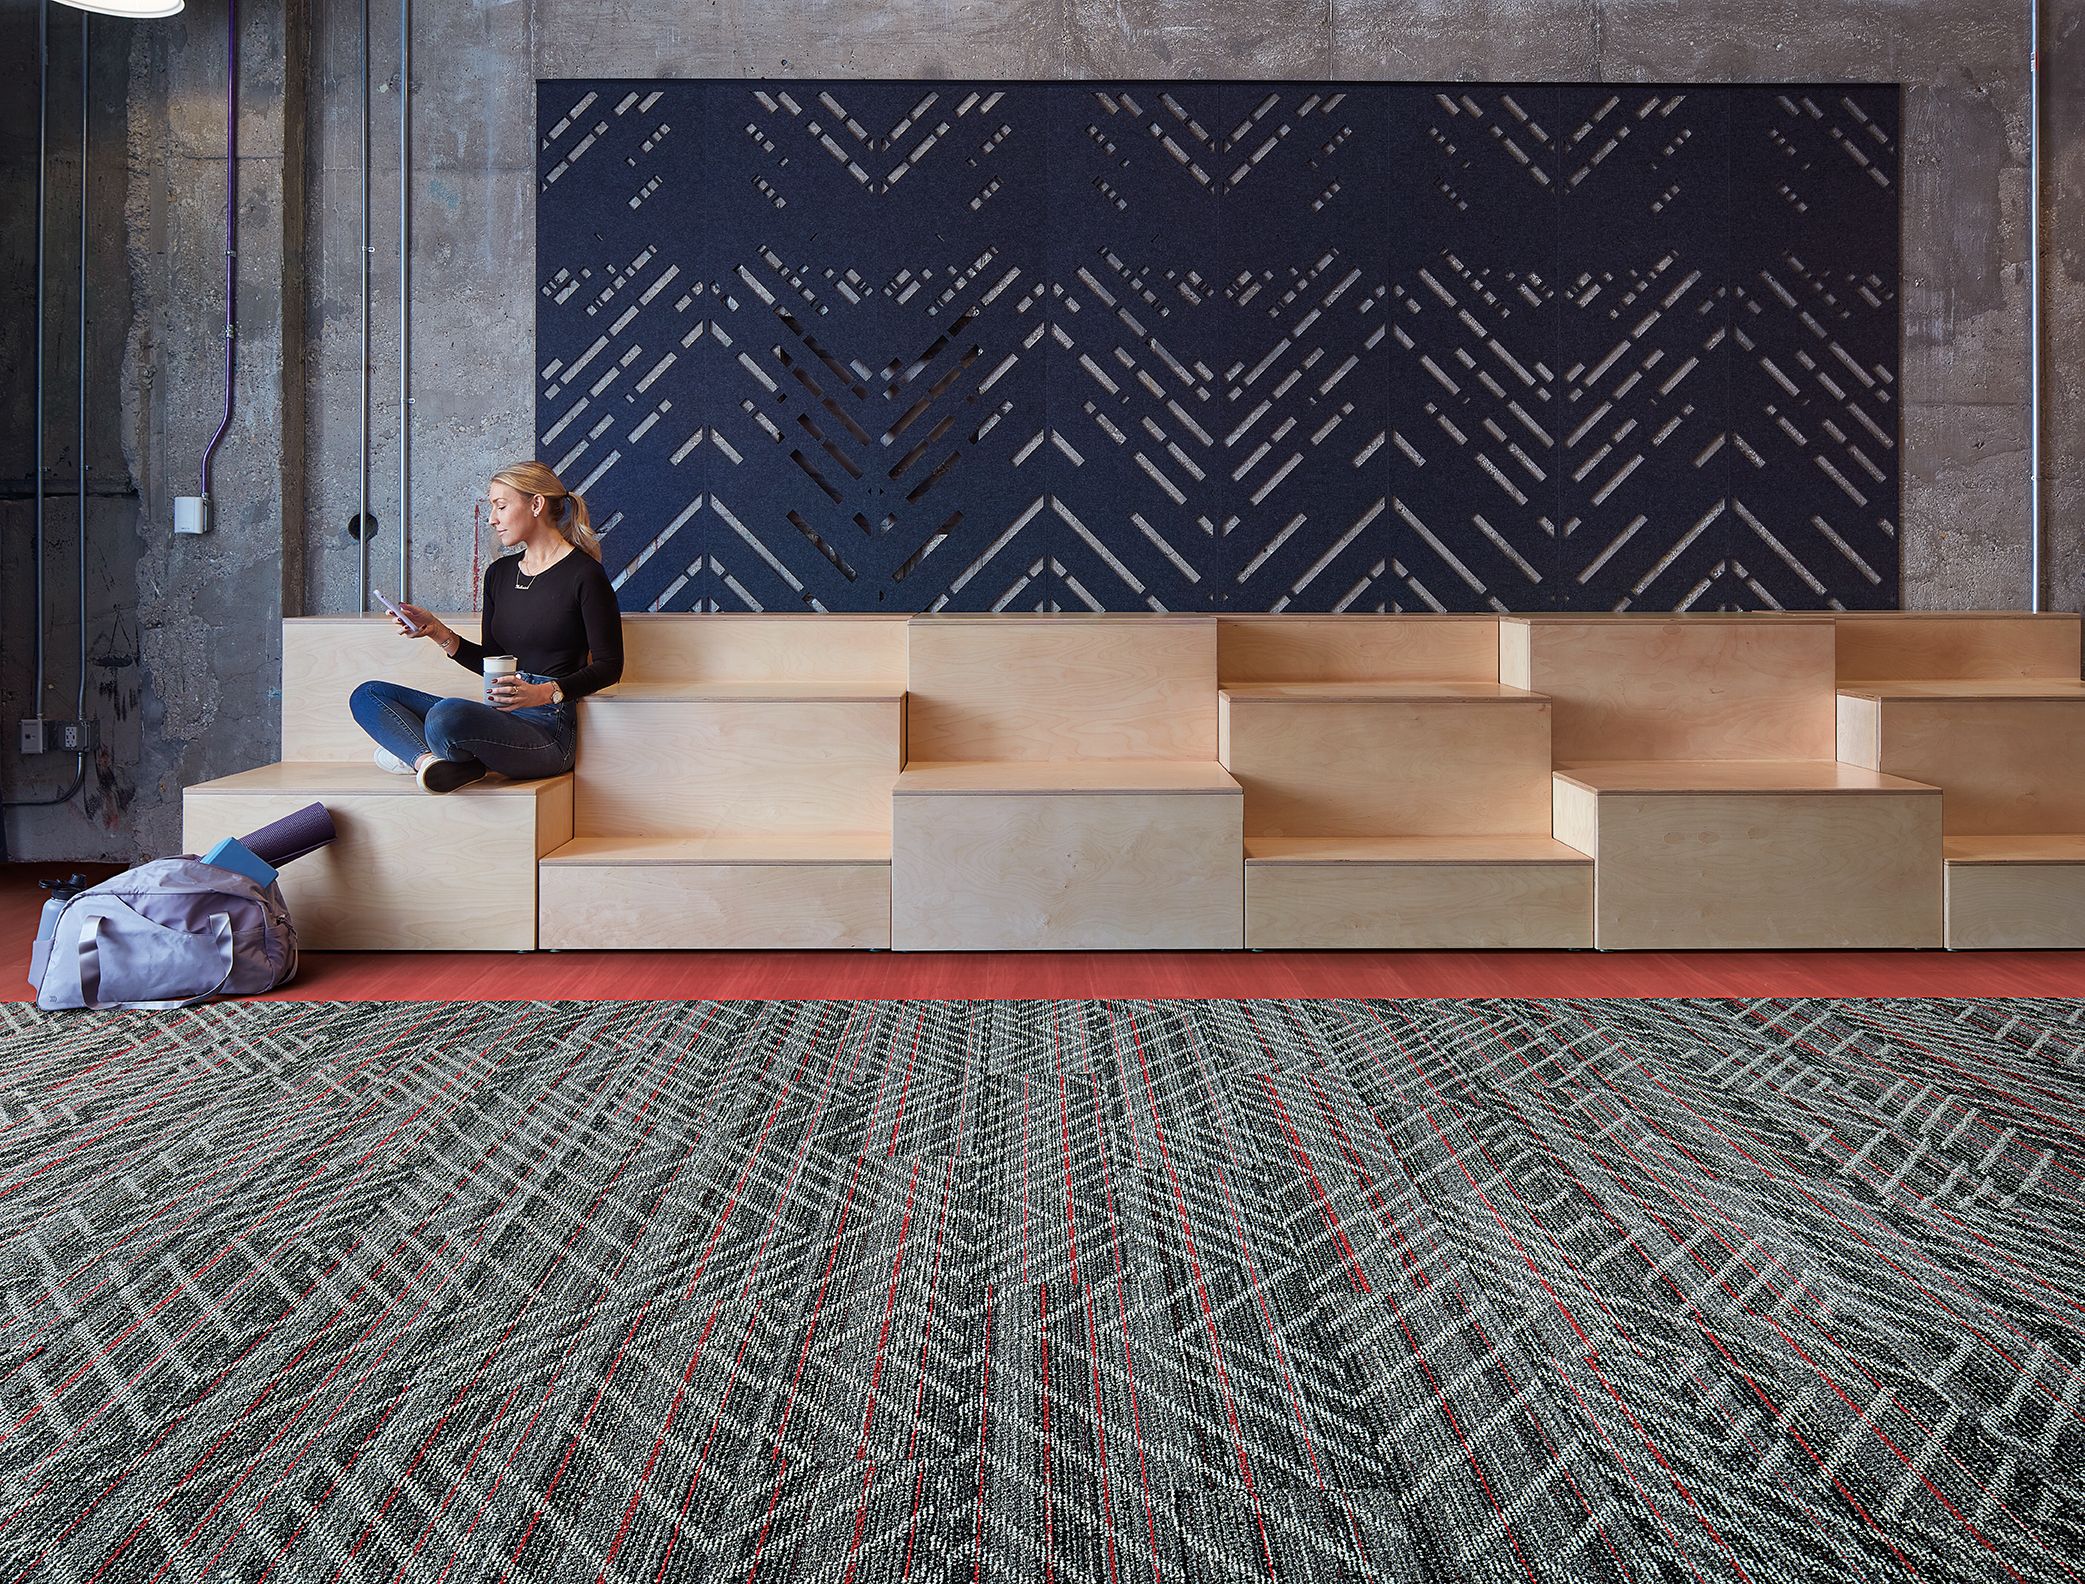 Interface Reflectors plank carpet tile with Studio Set LVT in open area with woman seated on wood risers numéro d’image 6